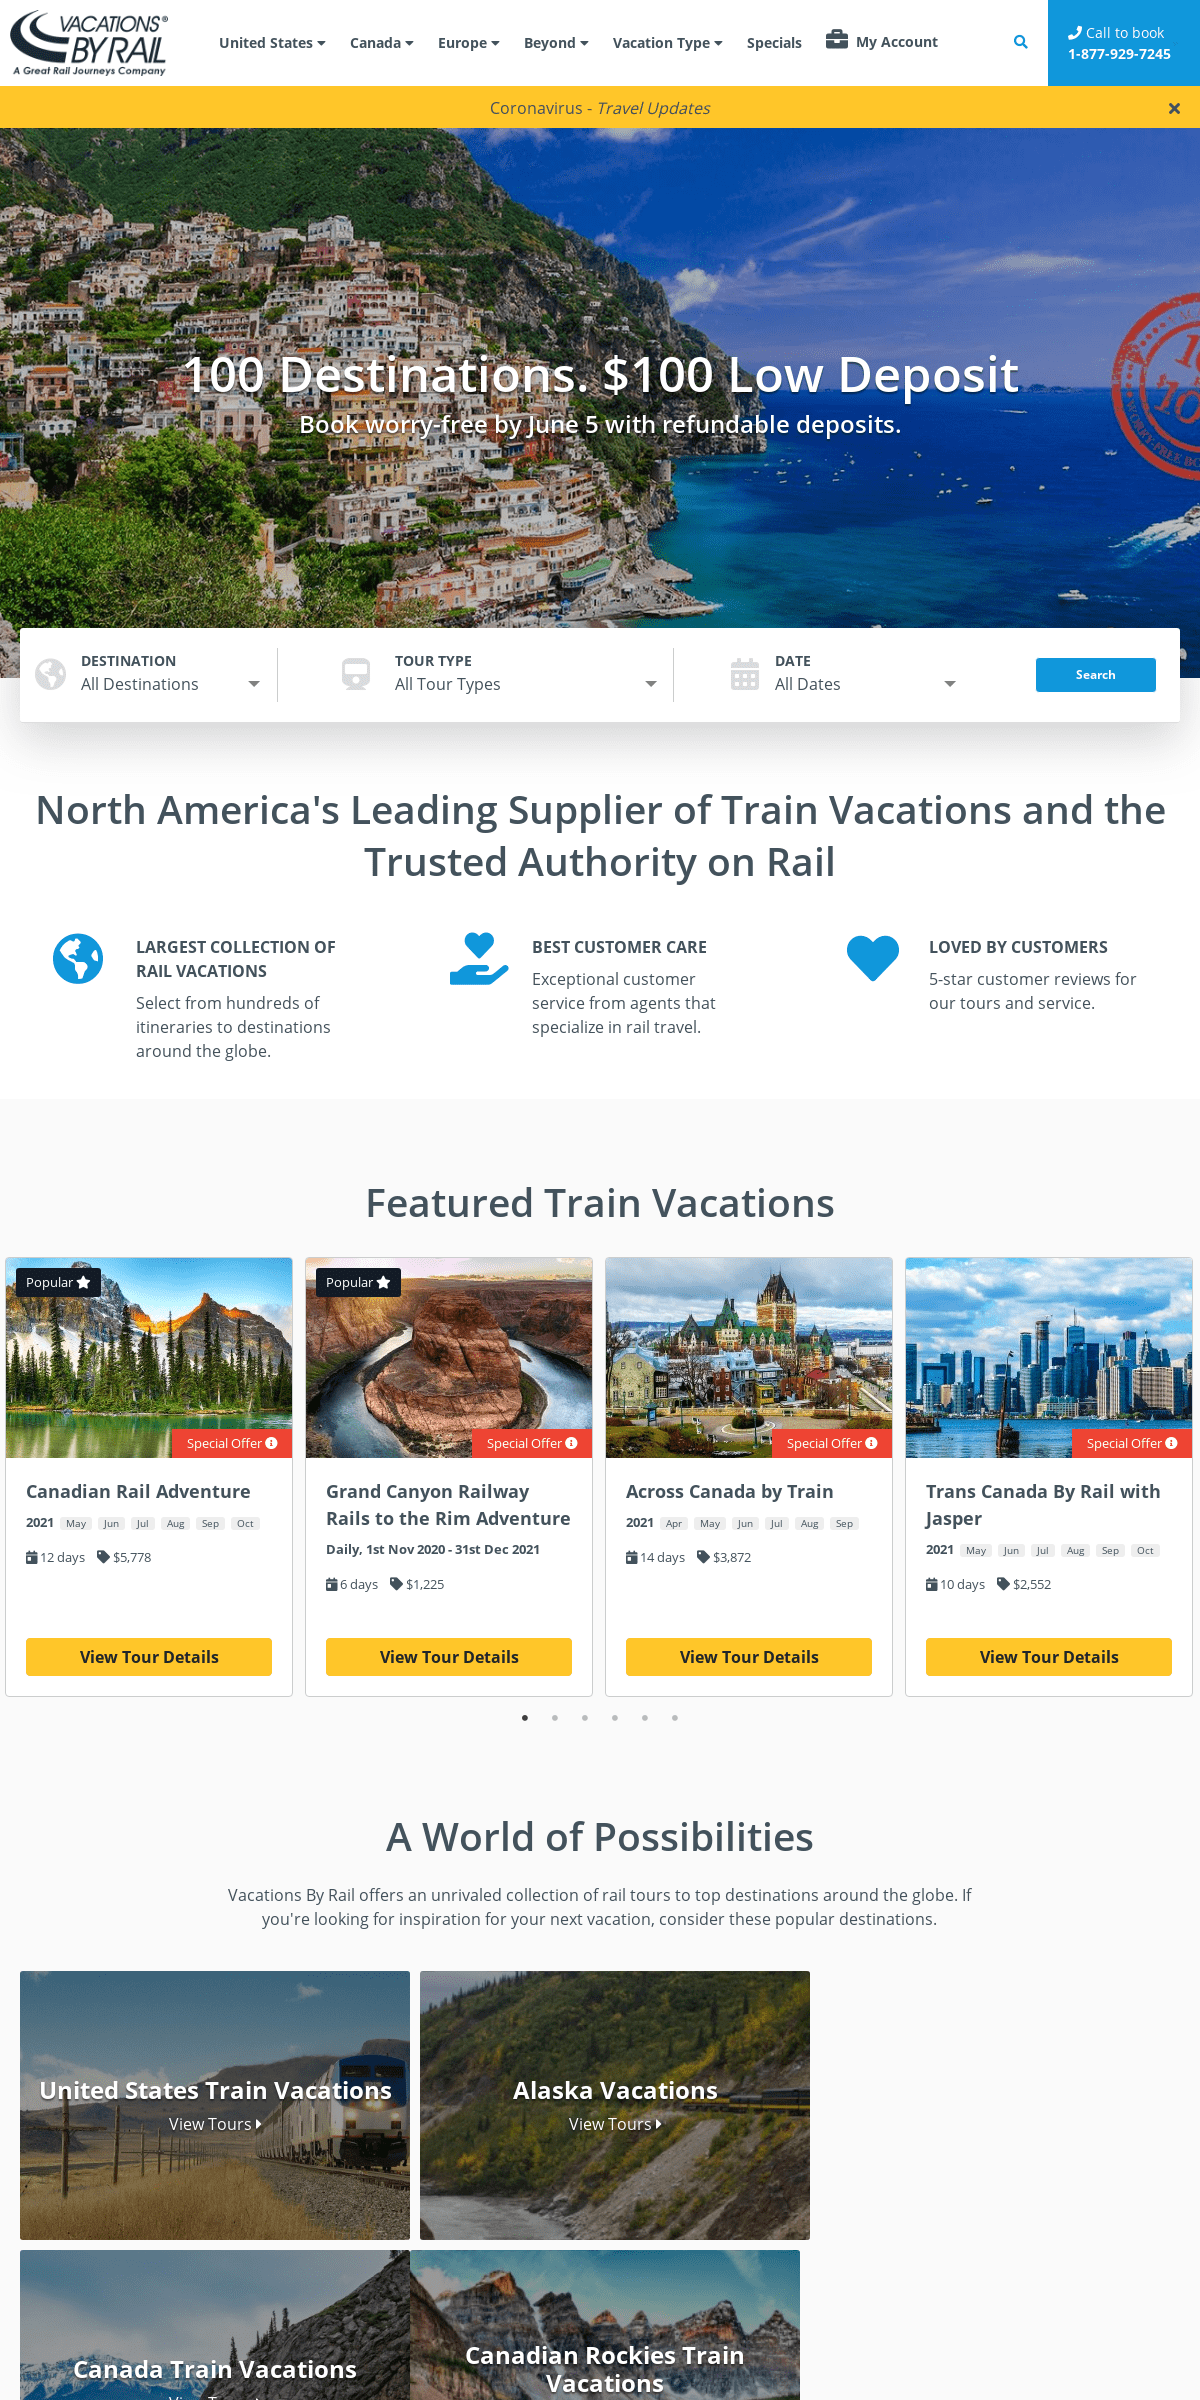 A complete backup of vacationsbyrail.com